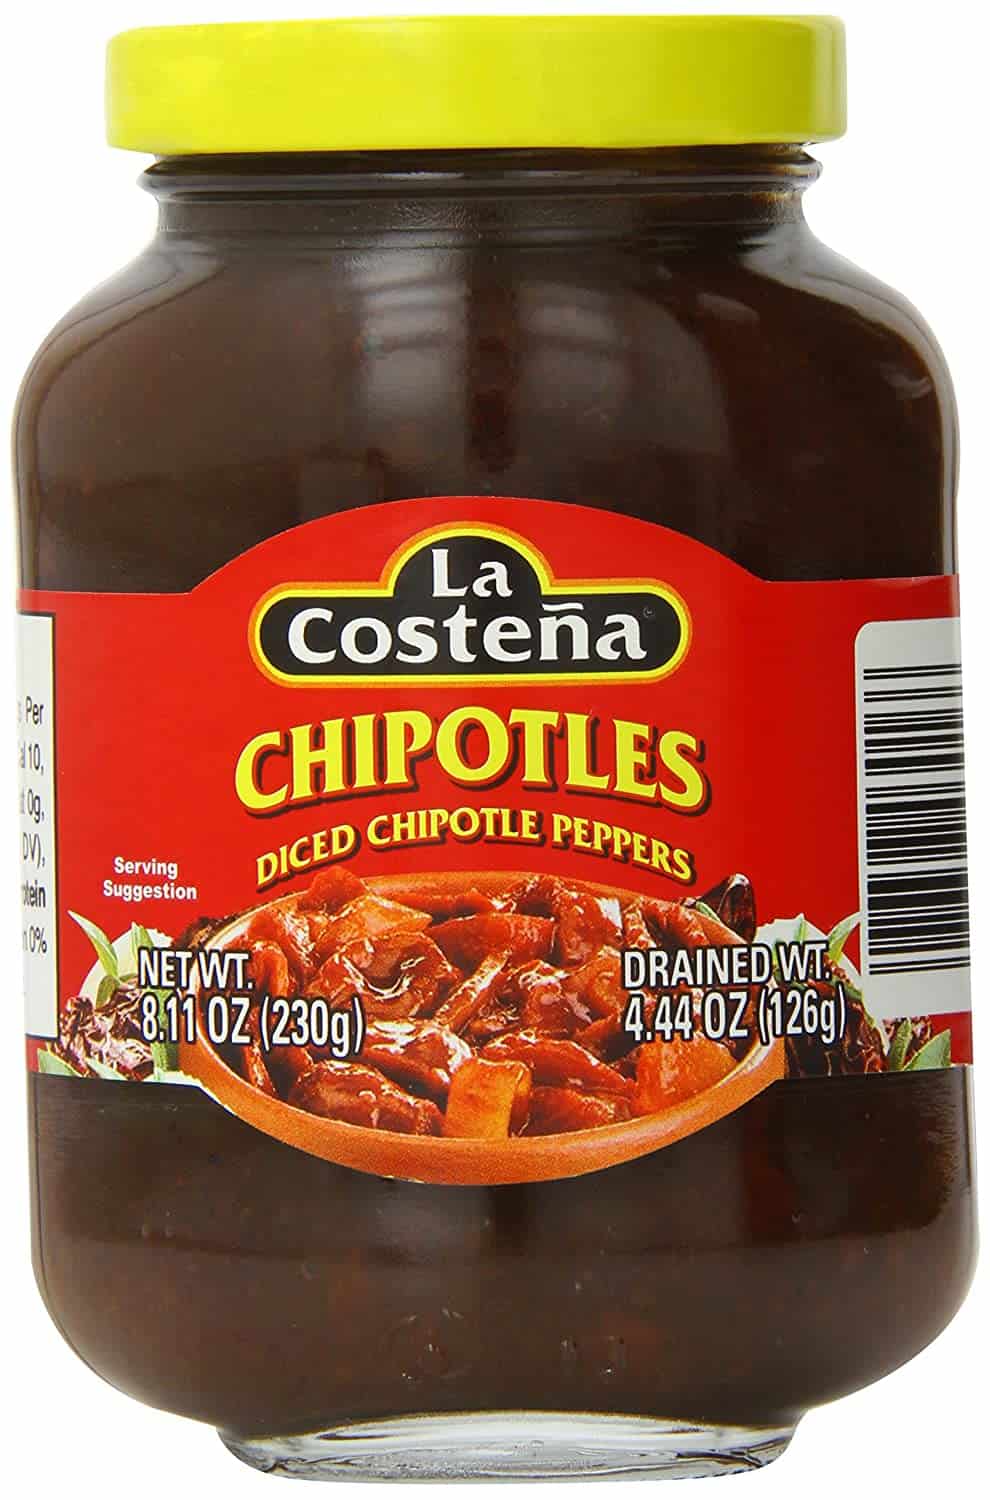 Image of chipotles in adobo